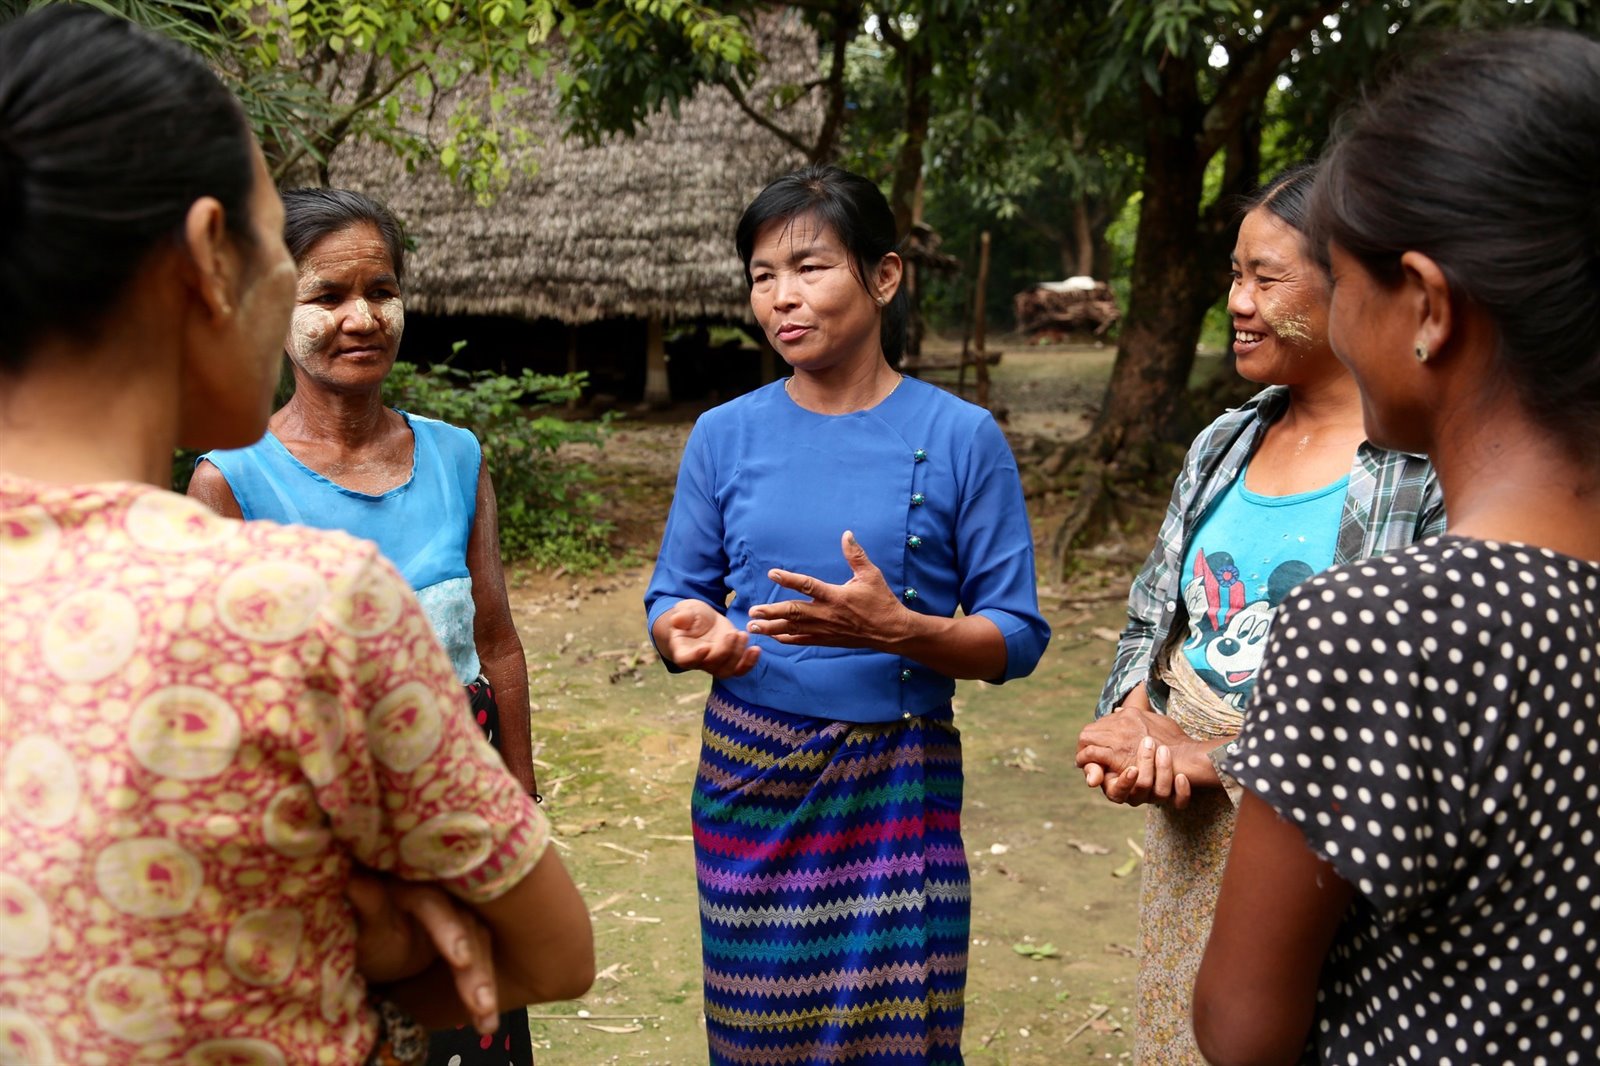 Daw Ma Khine Oo epitomises effective women's leadership. Supported by Oxfam, Daw Ma Khine Oo is very active in the community, advocating for community needs and supporting others when their rights are infringed.